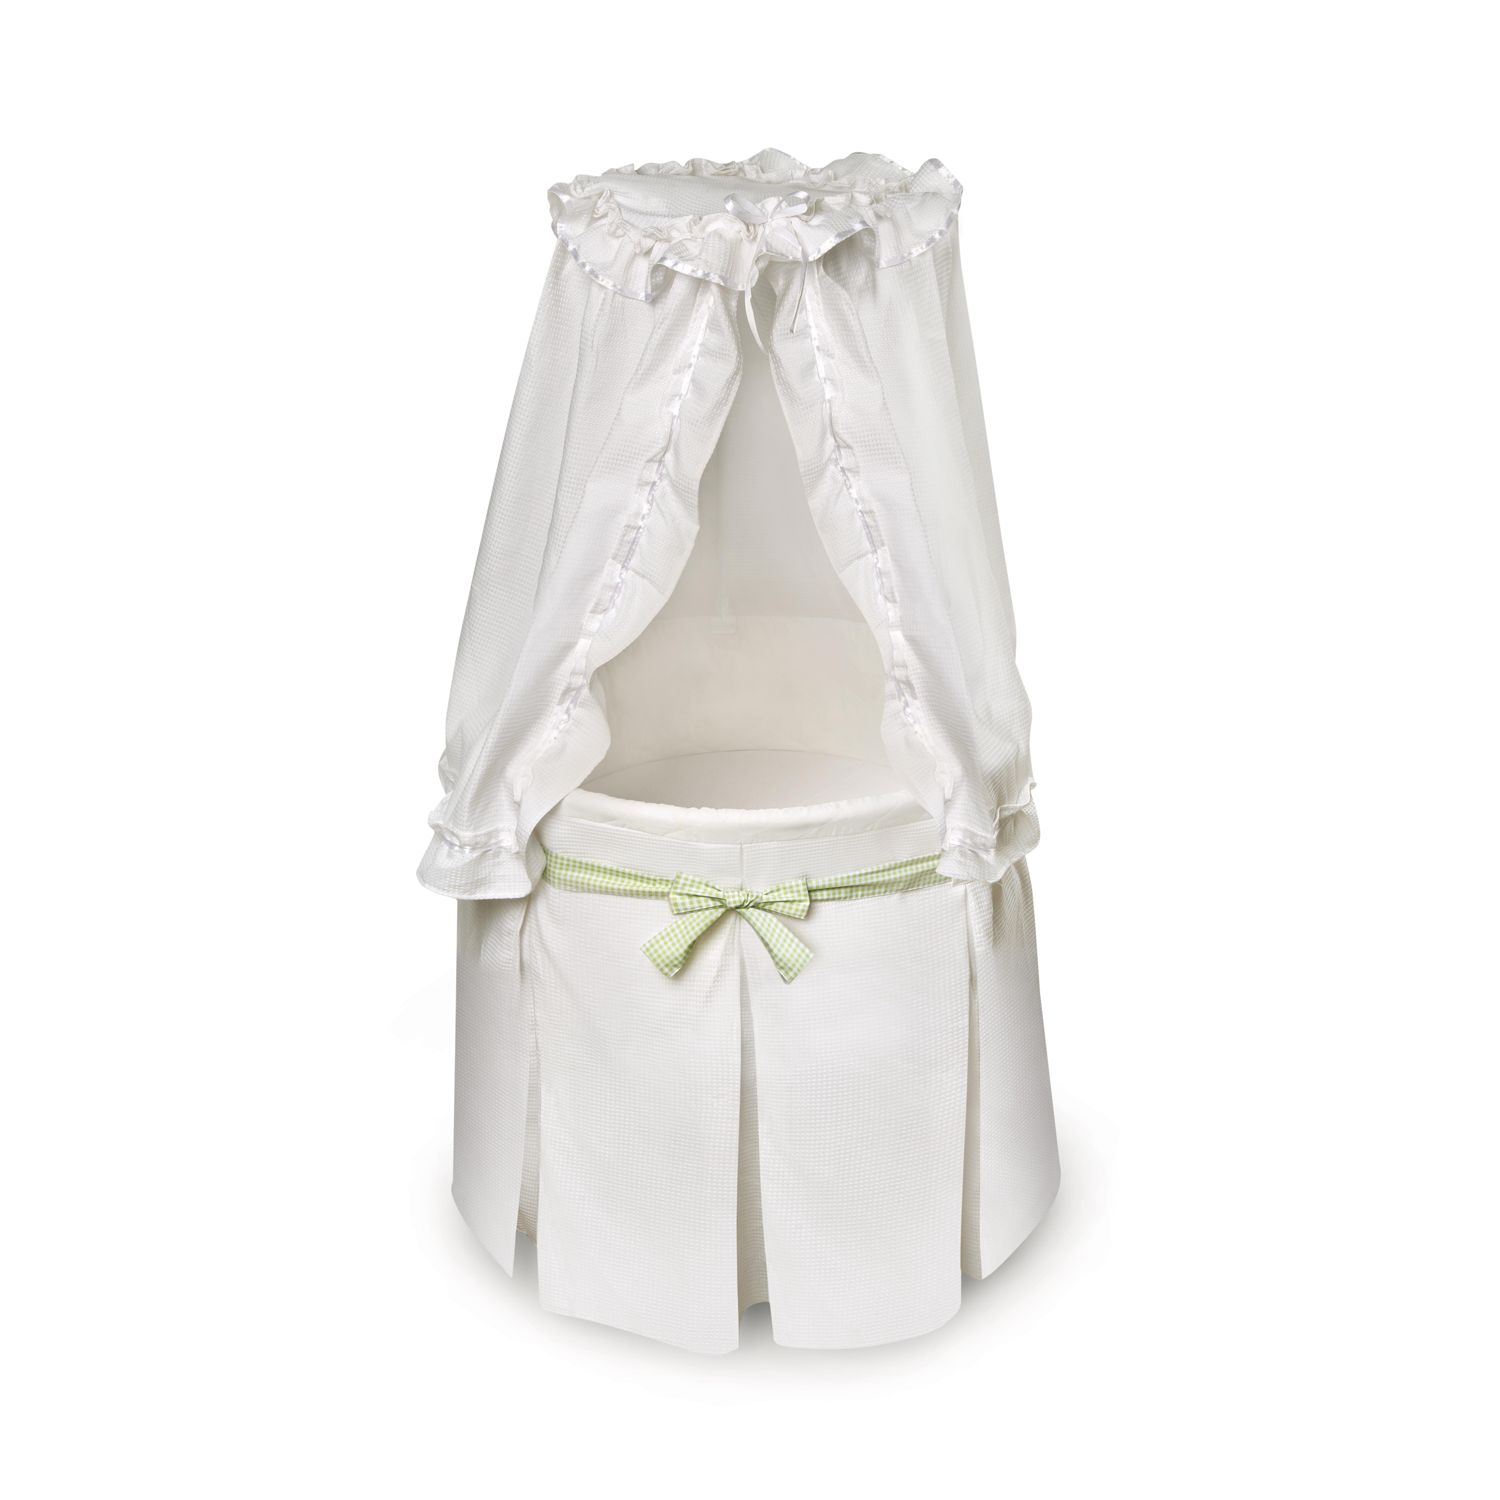 baby bassinet with storage